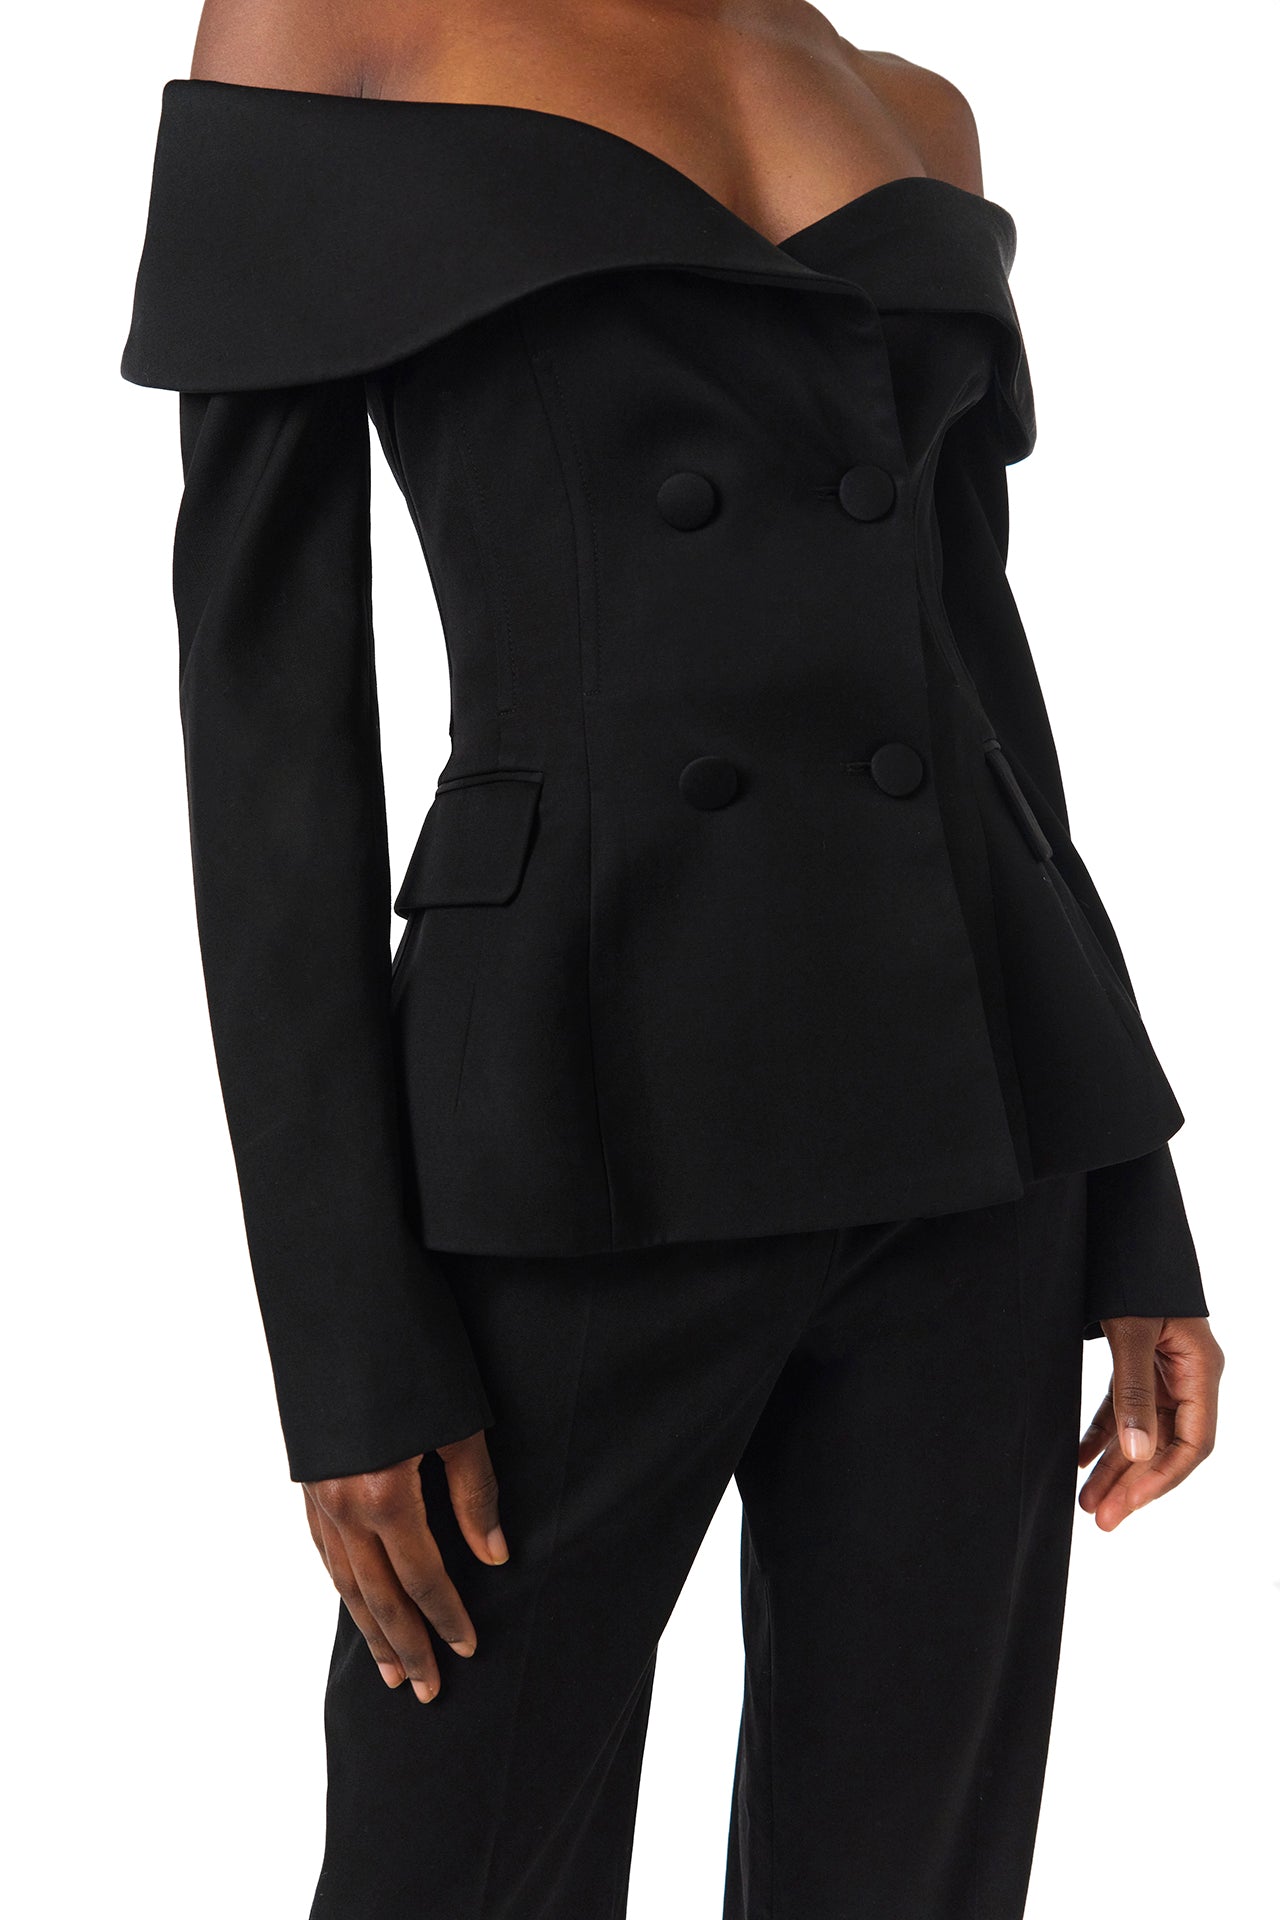 Monique Lhuillier Fall 2024 long sleeve corseted jacket with off-the-shoulder neckline in black wool - front crop.